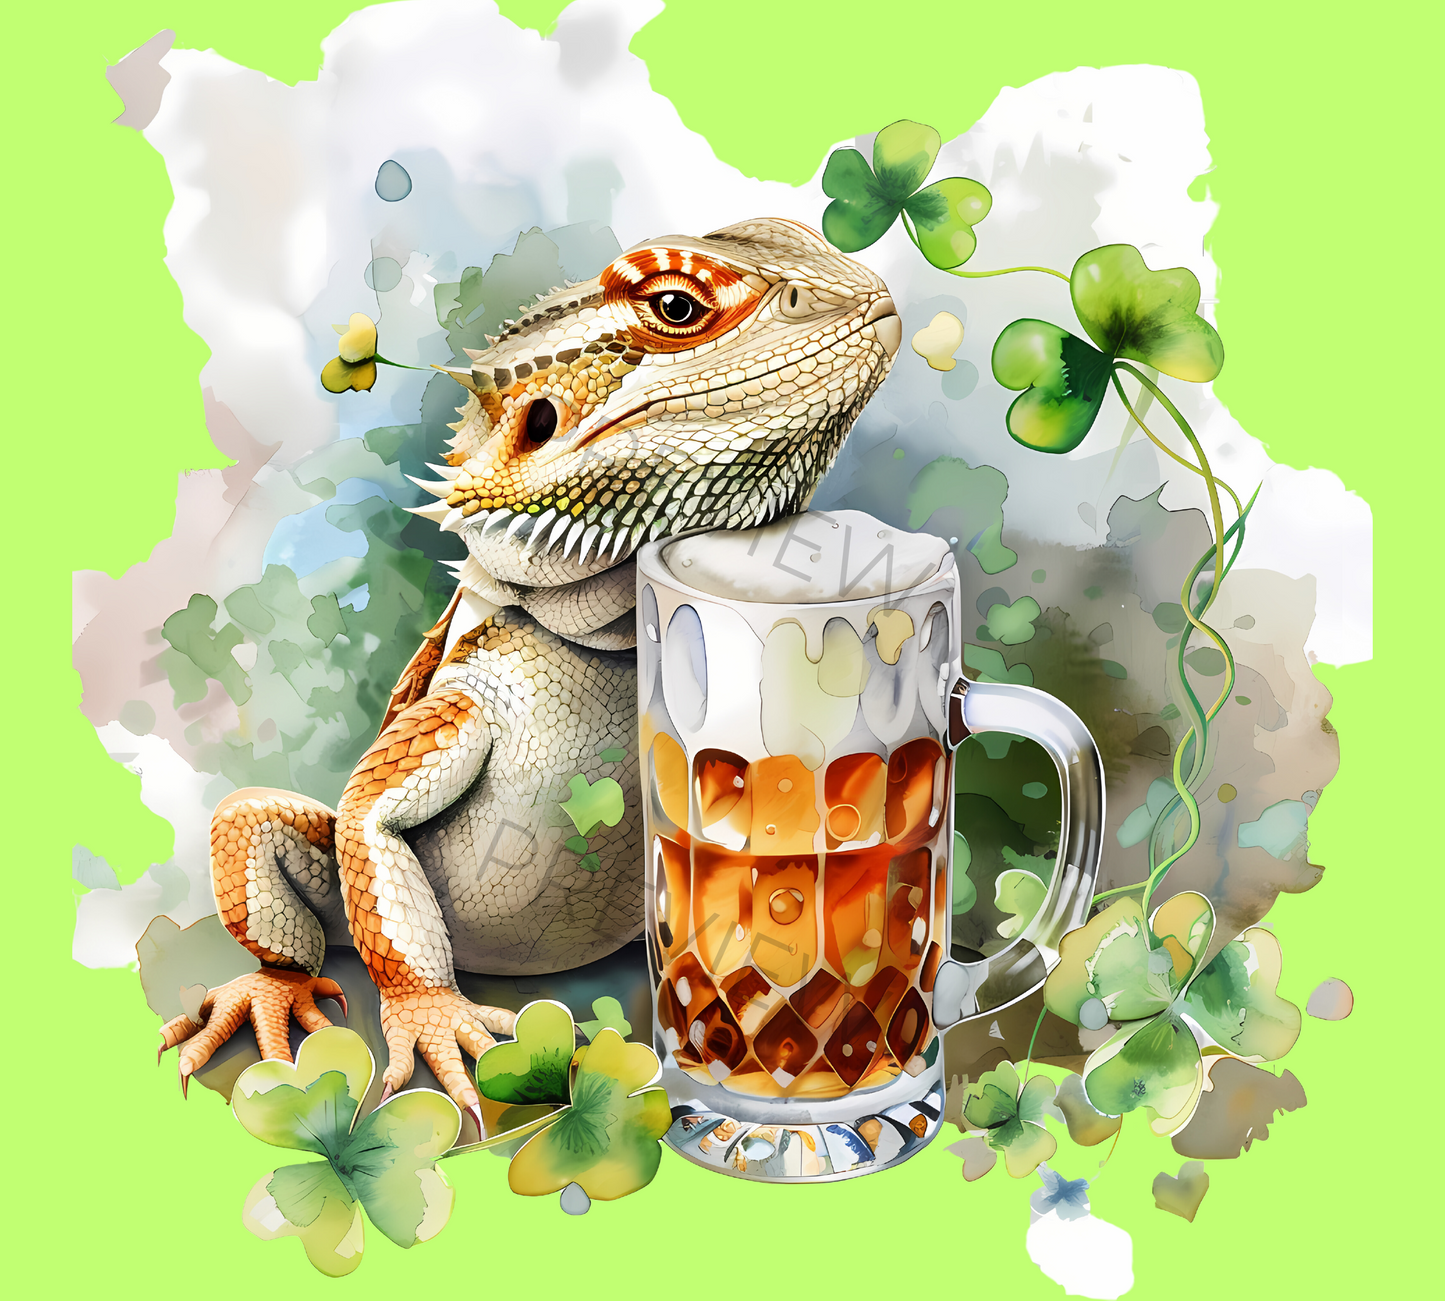 Bearded Dragon Clipart | Small Reptile PNG | Beards Clovers | St. Patrick's Day | Reptile Lizard | Transparent Background | Commercial Use